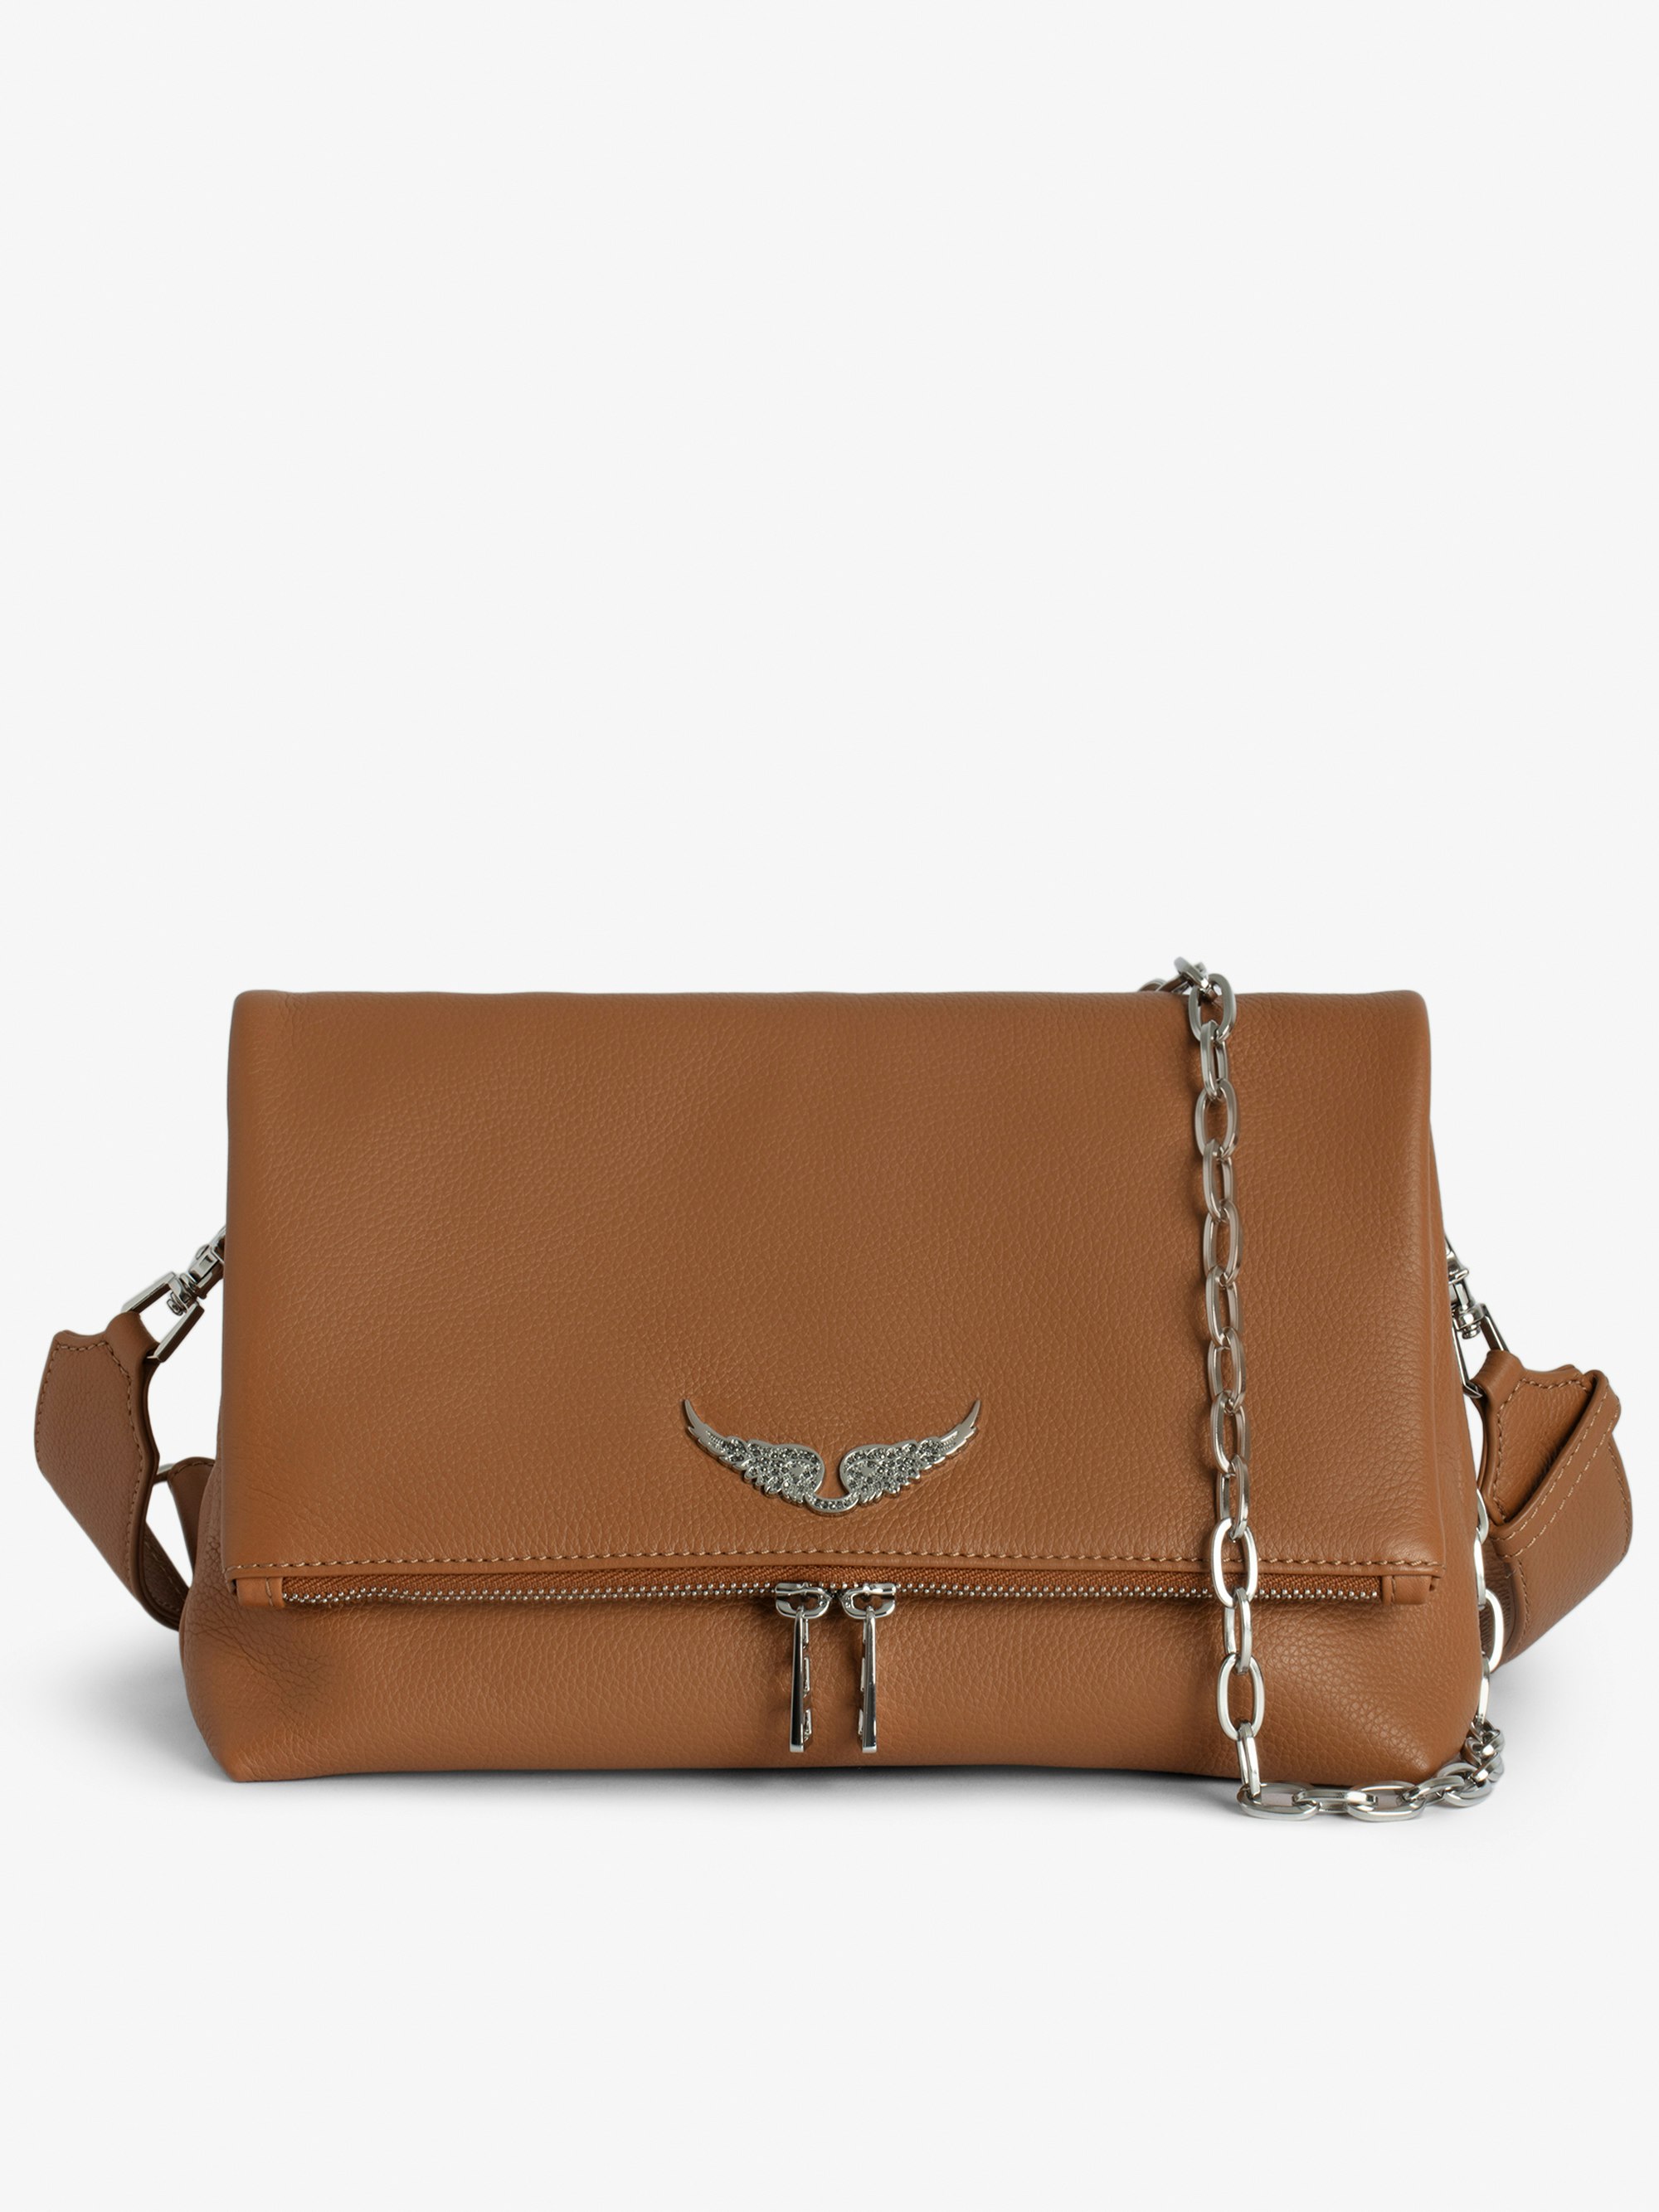 Rocky Bag - Camel grained leather bag with chain, shoulder strap and signature wings.